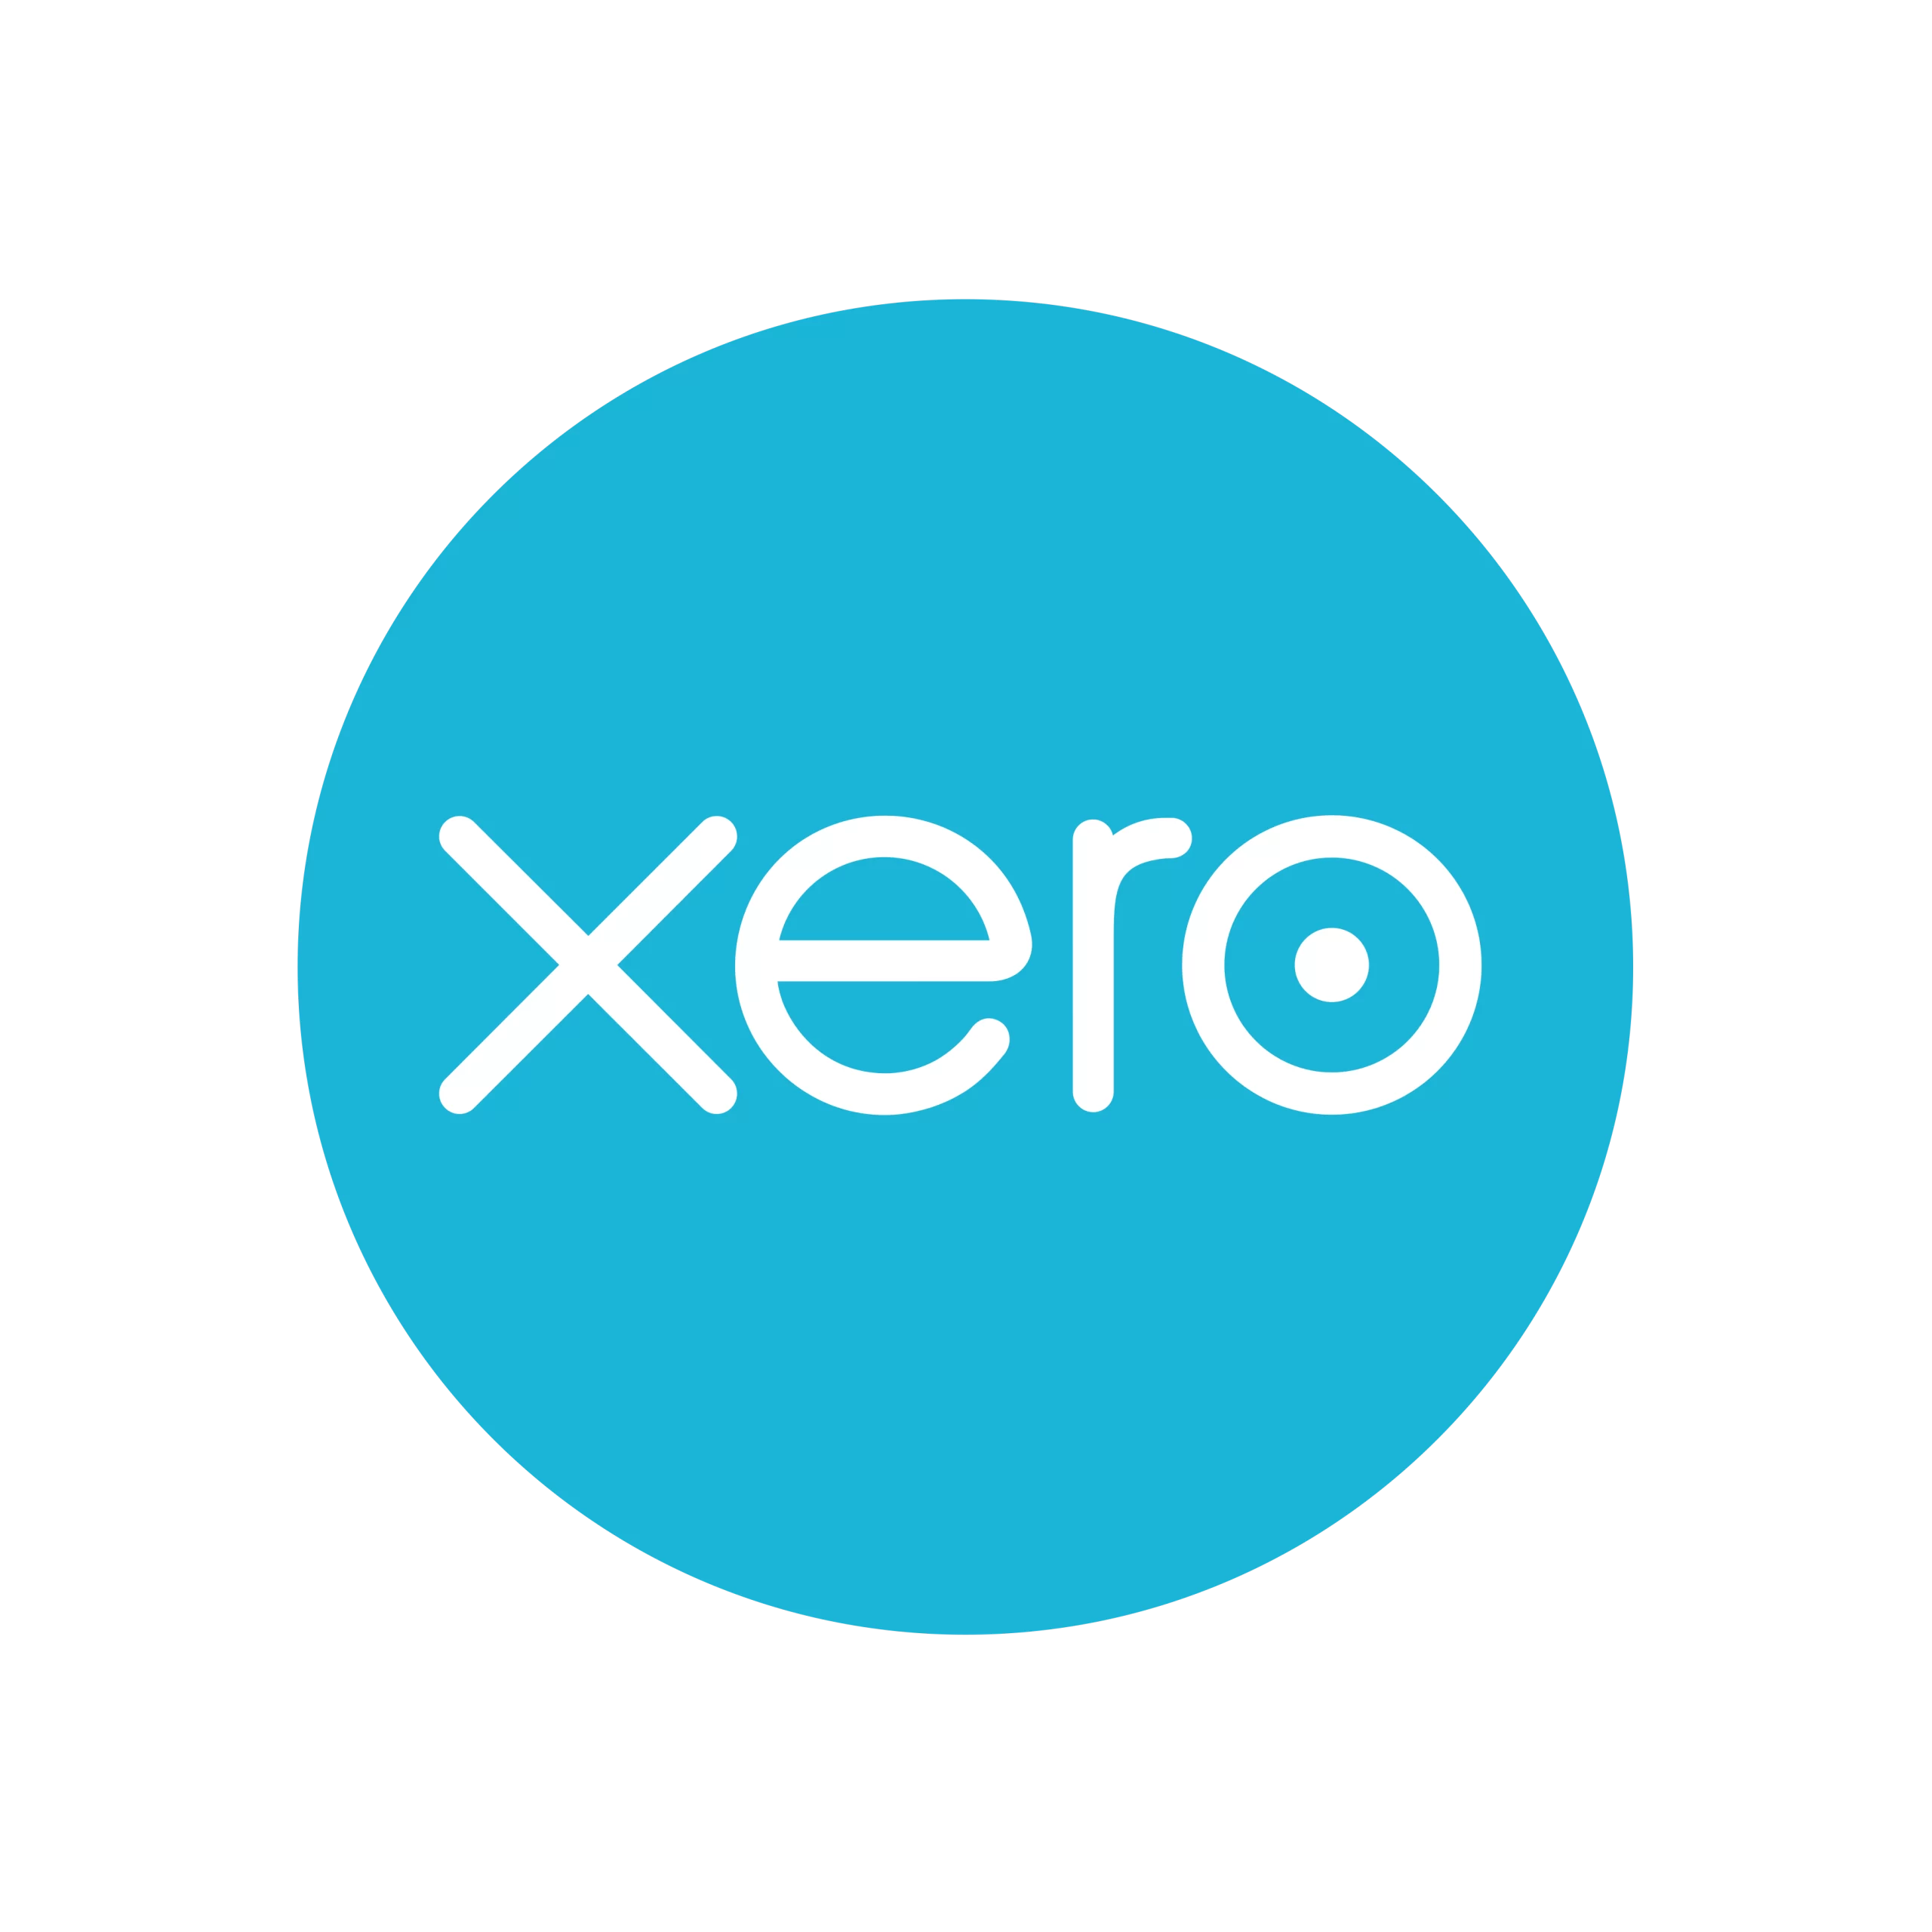 A picture of the Xero logo